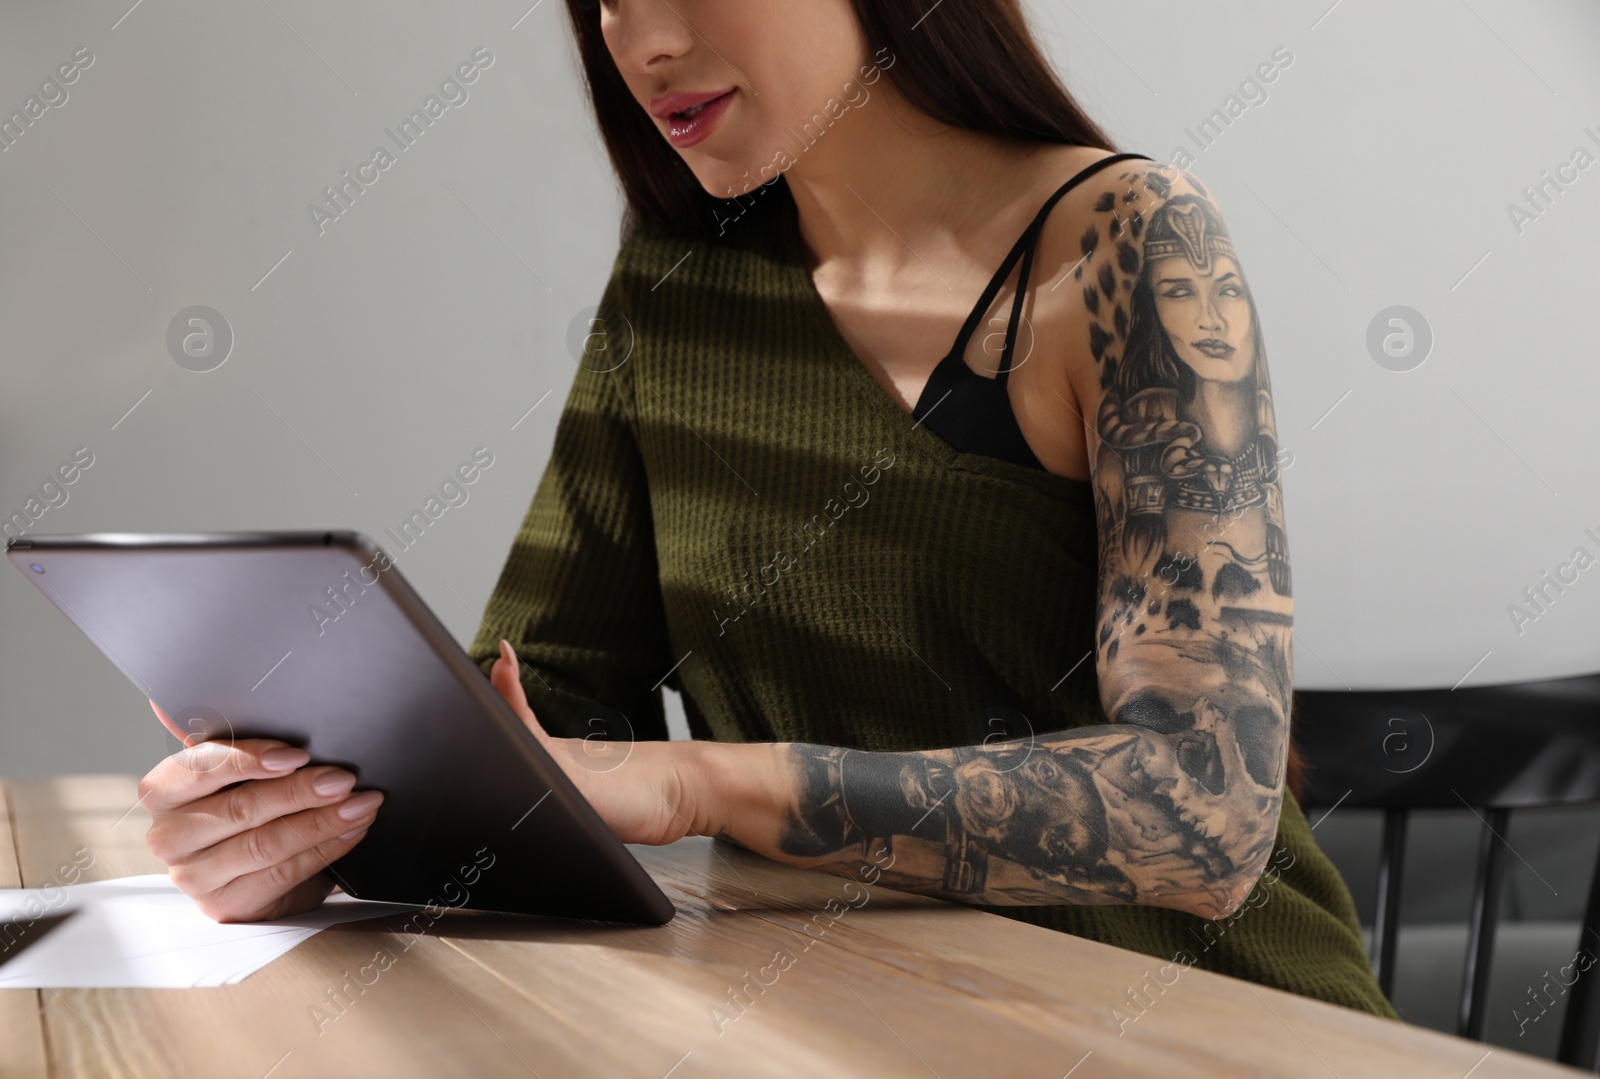 Photo of Beautiful woman with tattoos on arm using tablet at table indoors, closeup